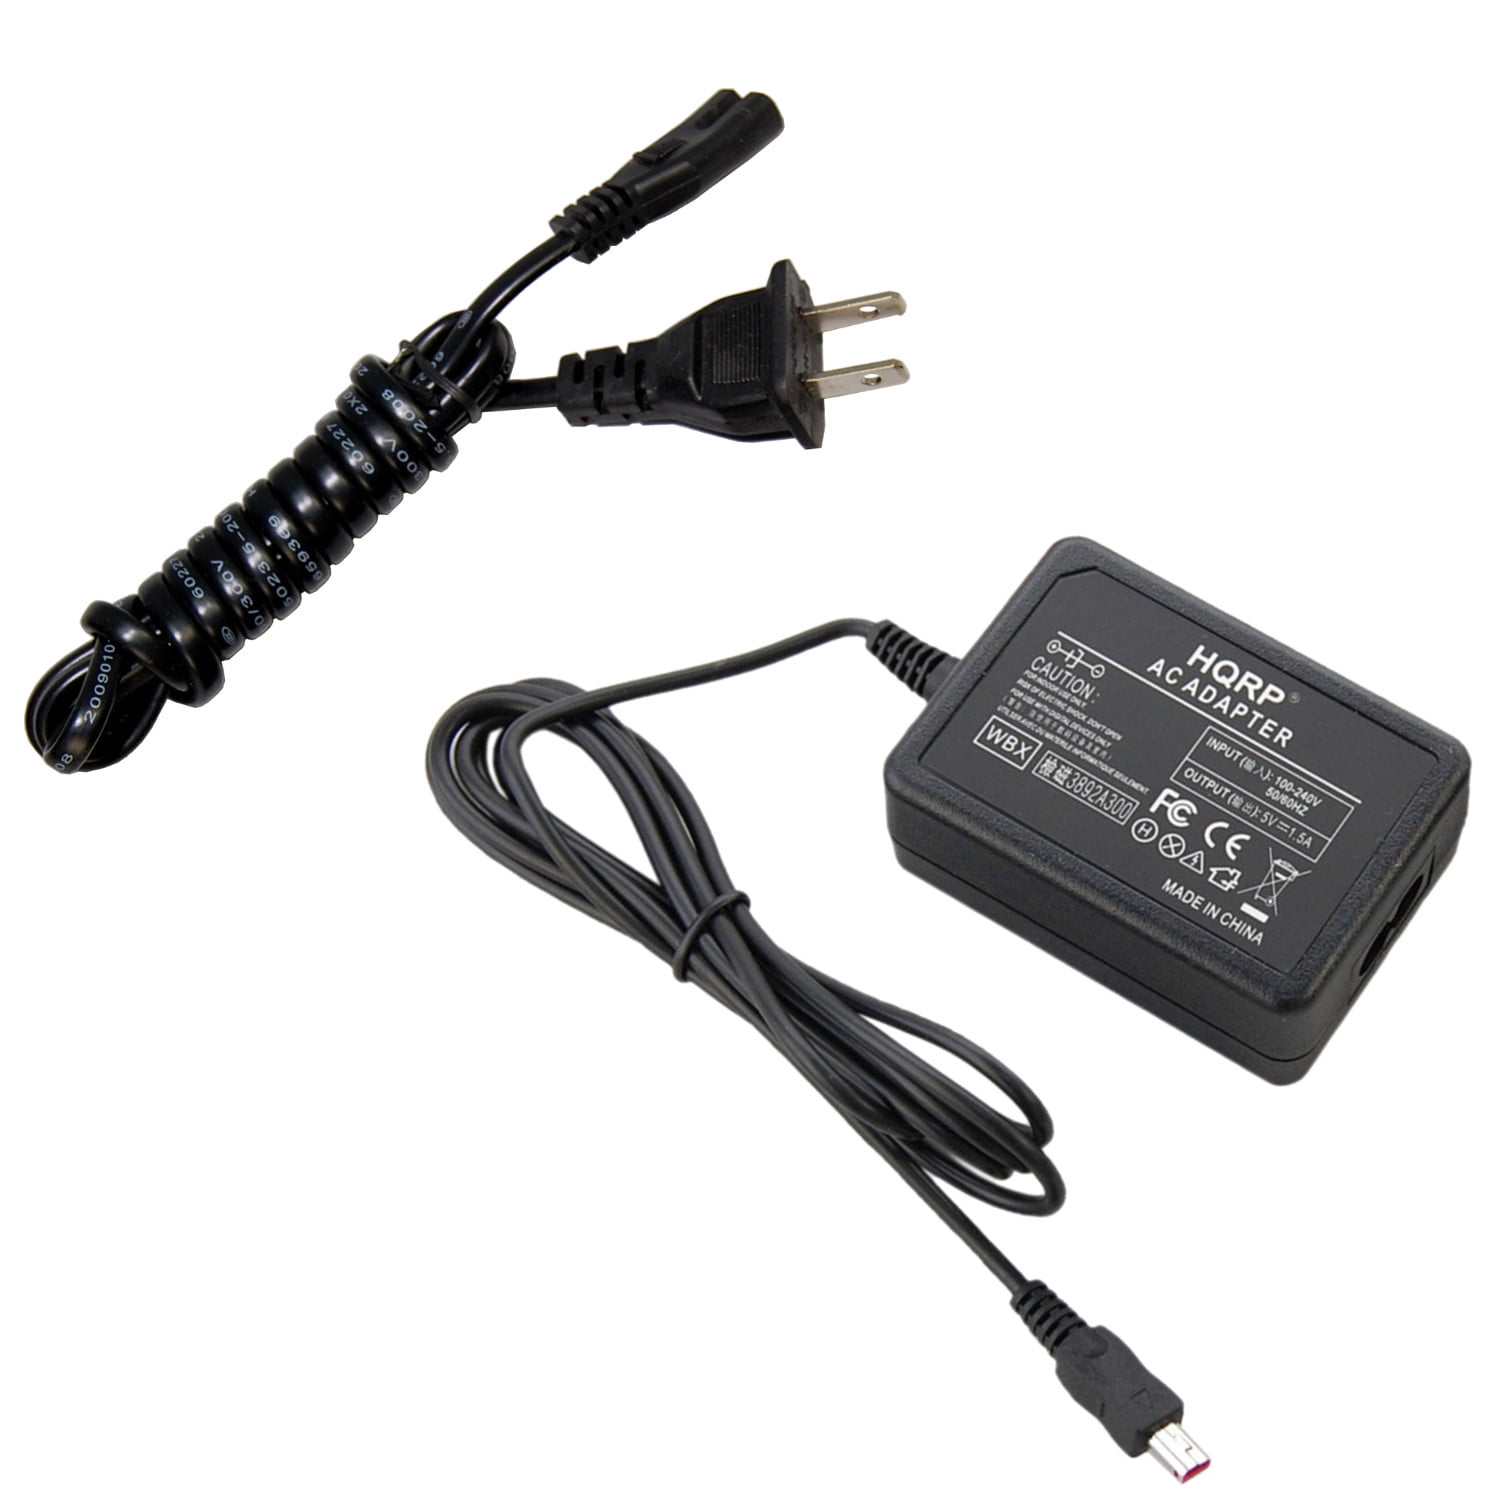 AC Adapter for Samsung HMX-U10 BN Camcorder Video Camera DC Power Supply Charger Cord Cable 6.5 Feet Compatible Replacement